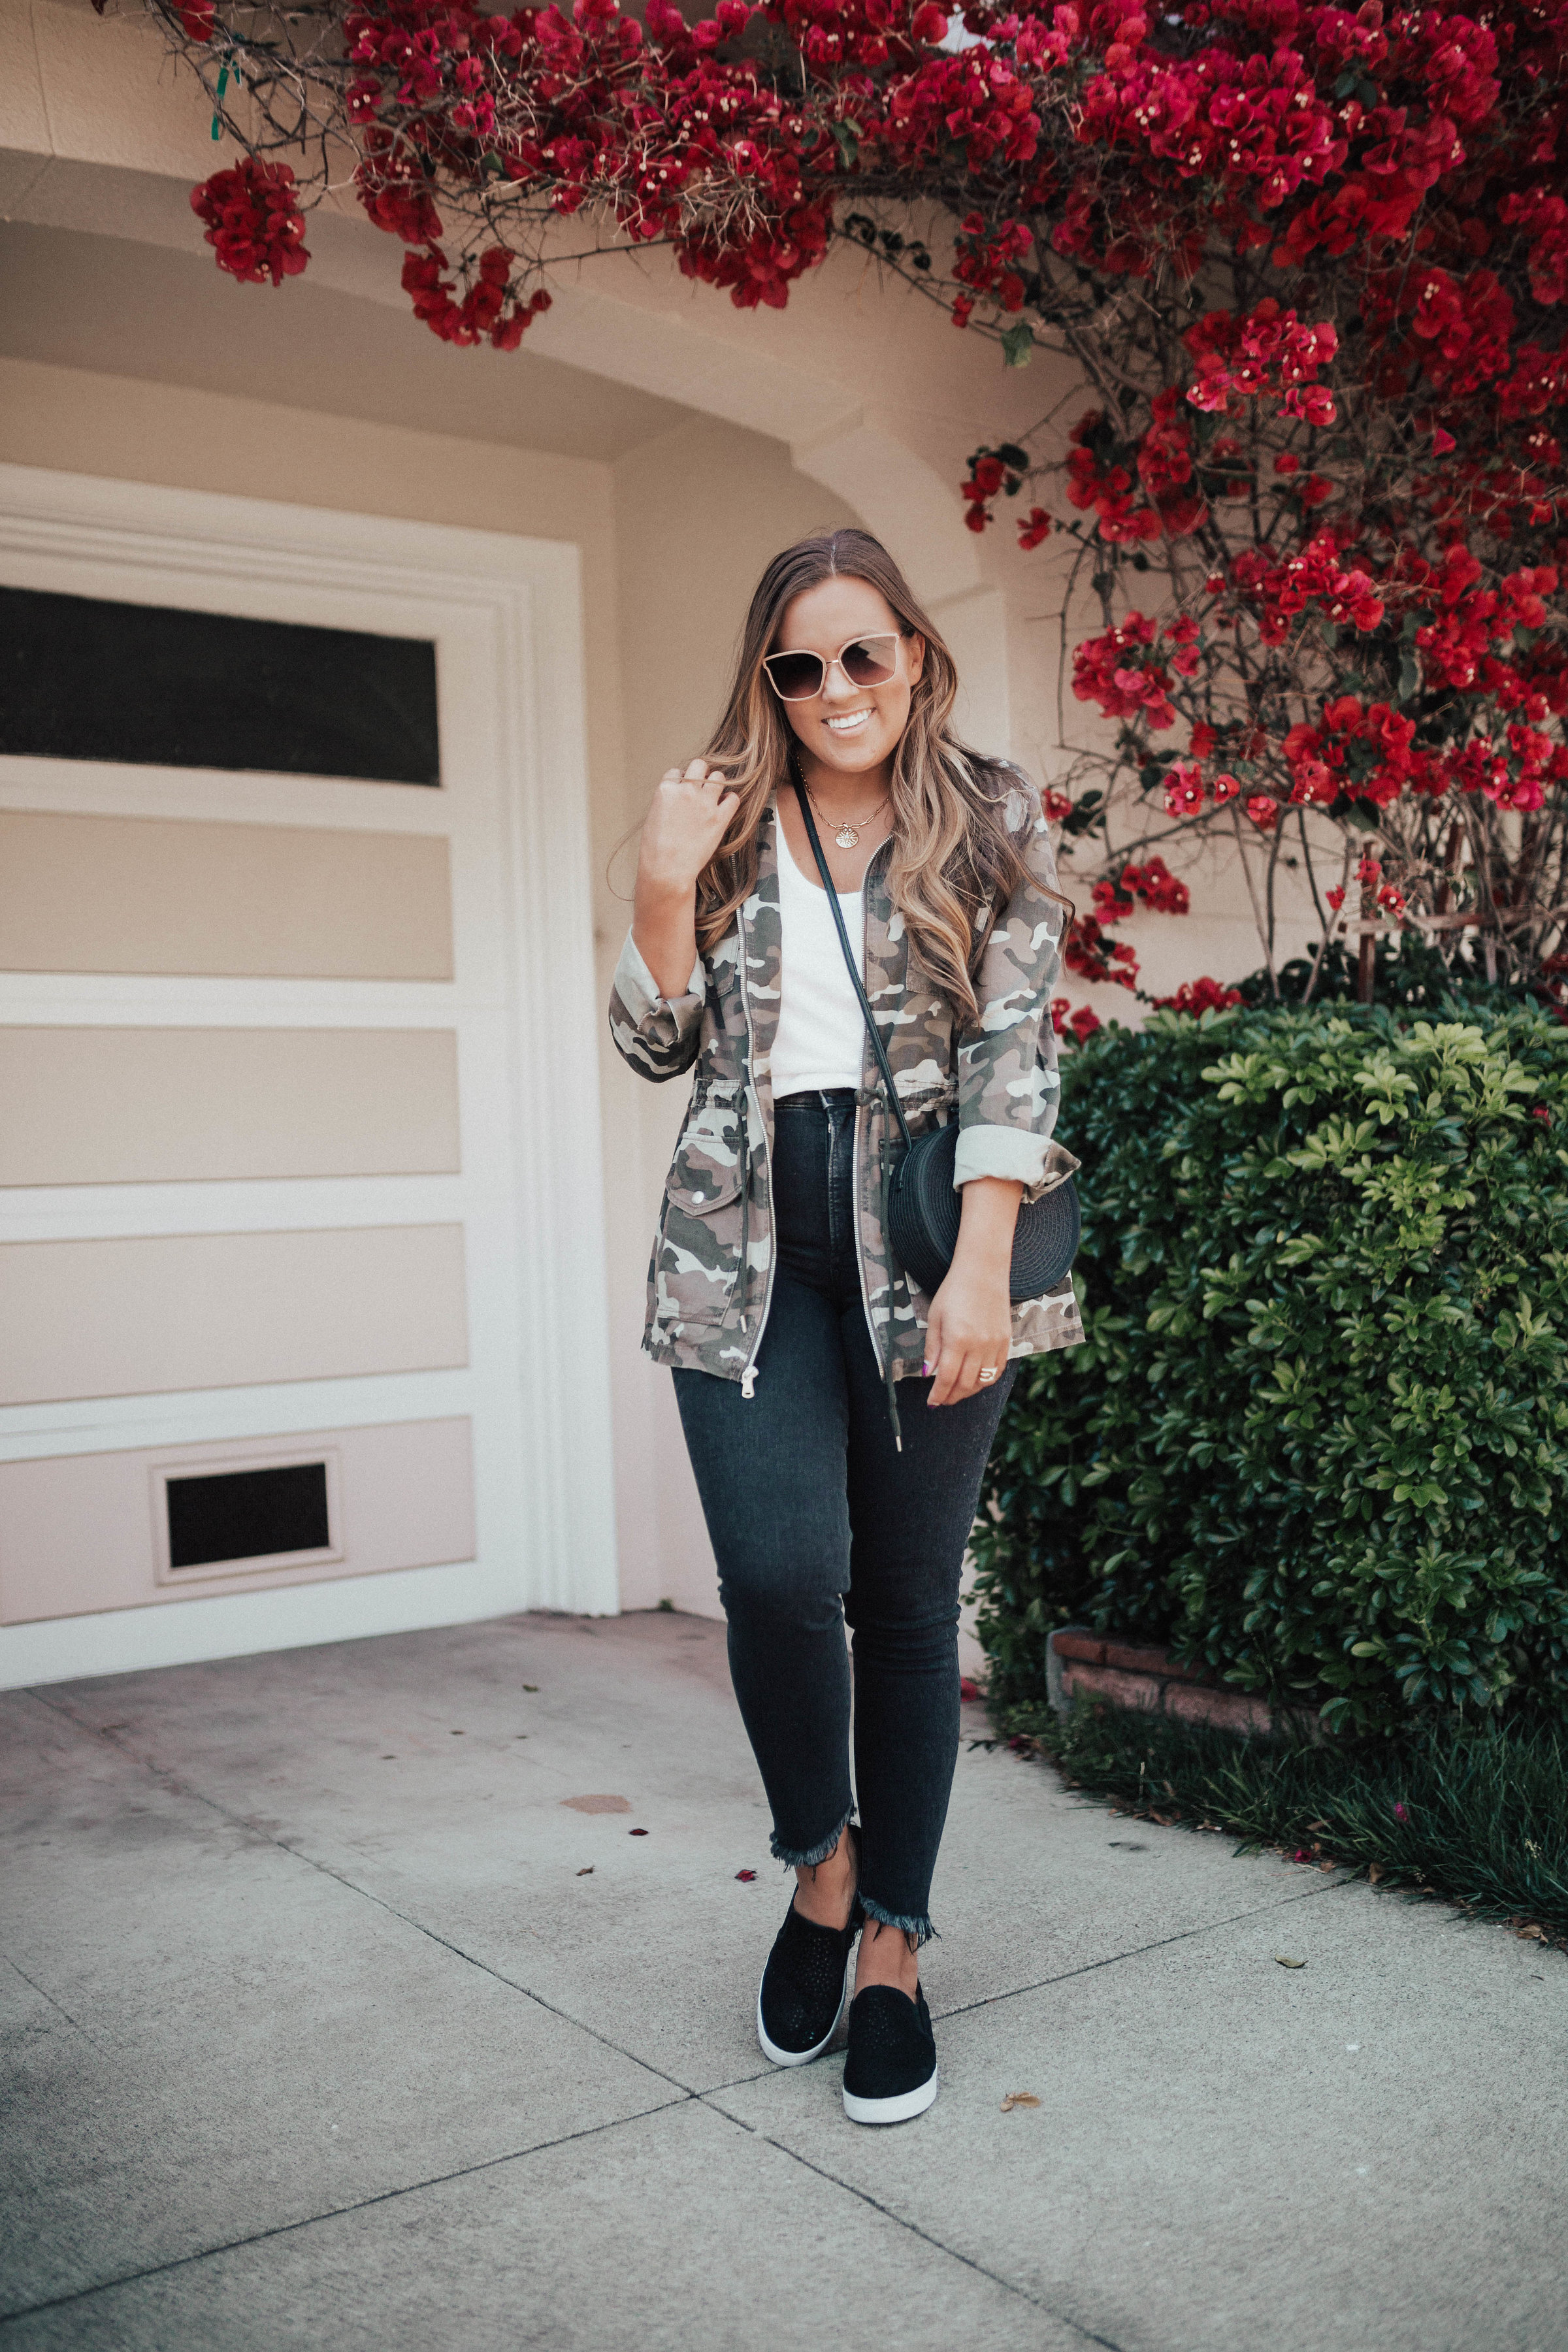 Ashley Zeal from Two Peas in a Prada shares their August Top Ten Sellers. This camo jackets and slip on sneakers made the list! 